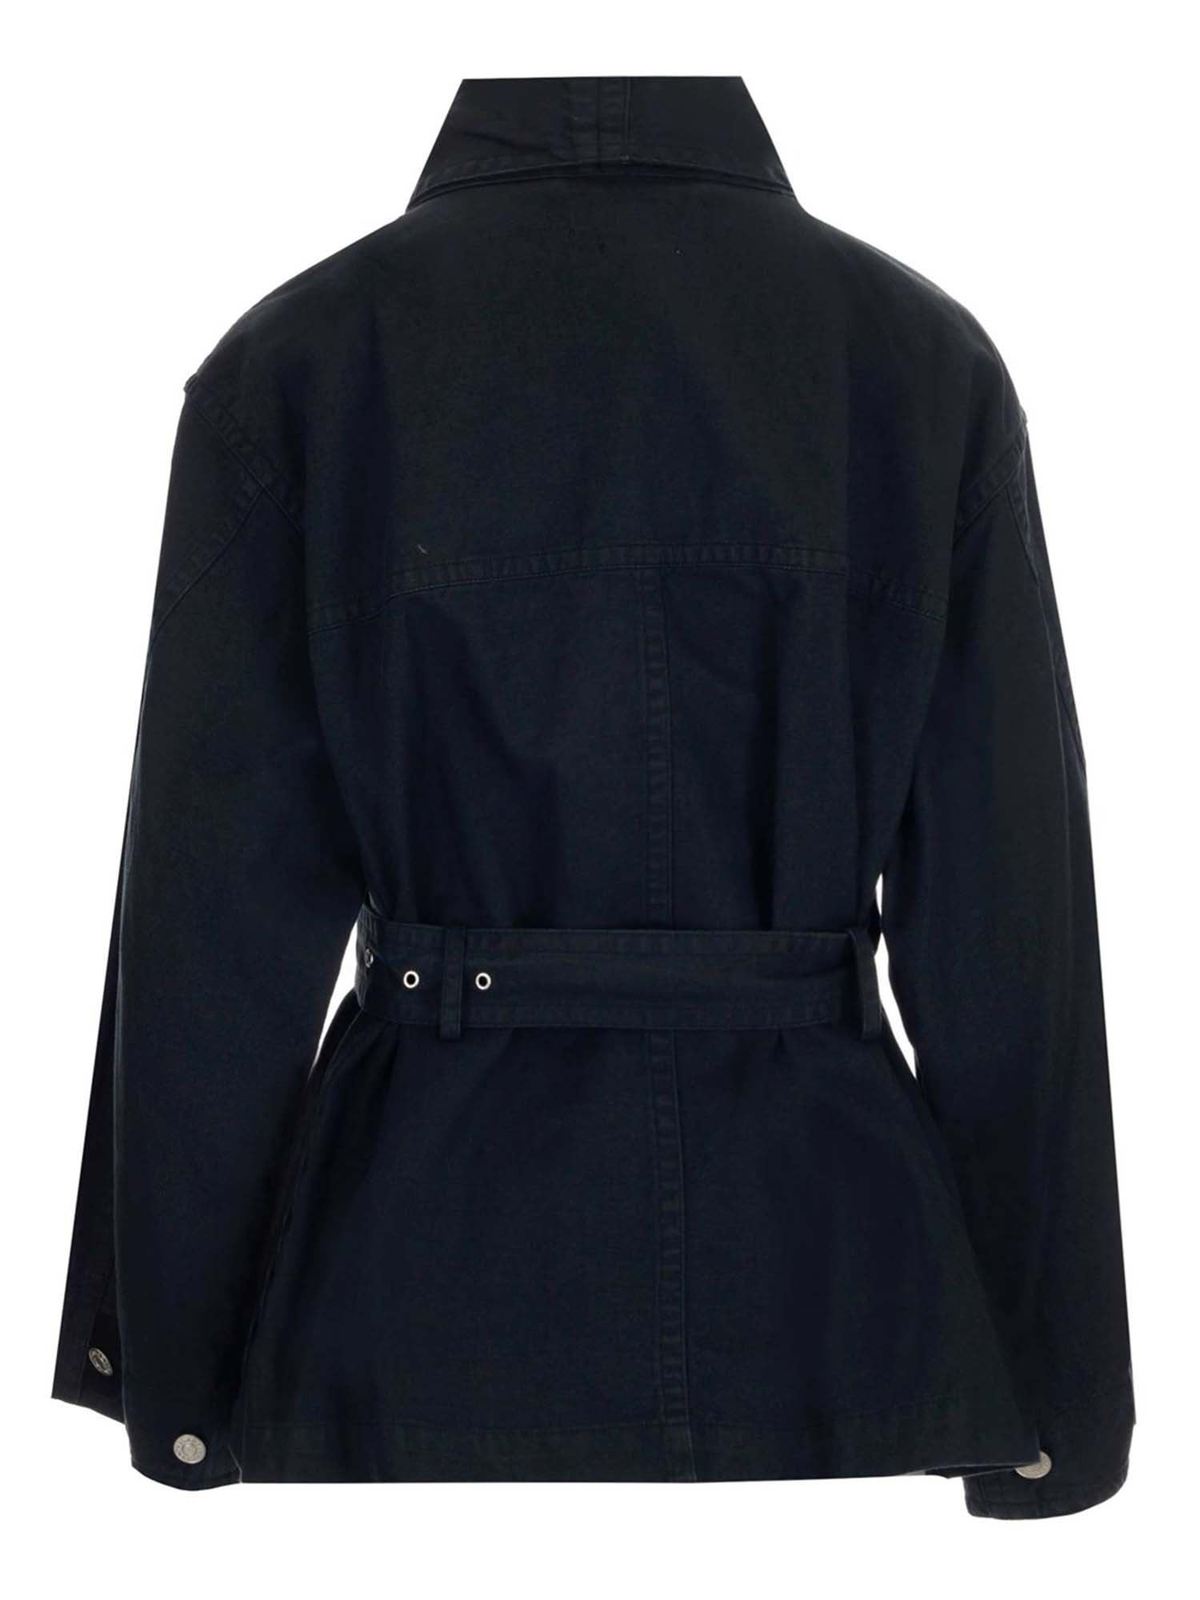 Isabel marant etoile - Prunille trench coat in Faded Black color ...